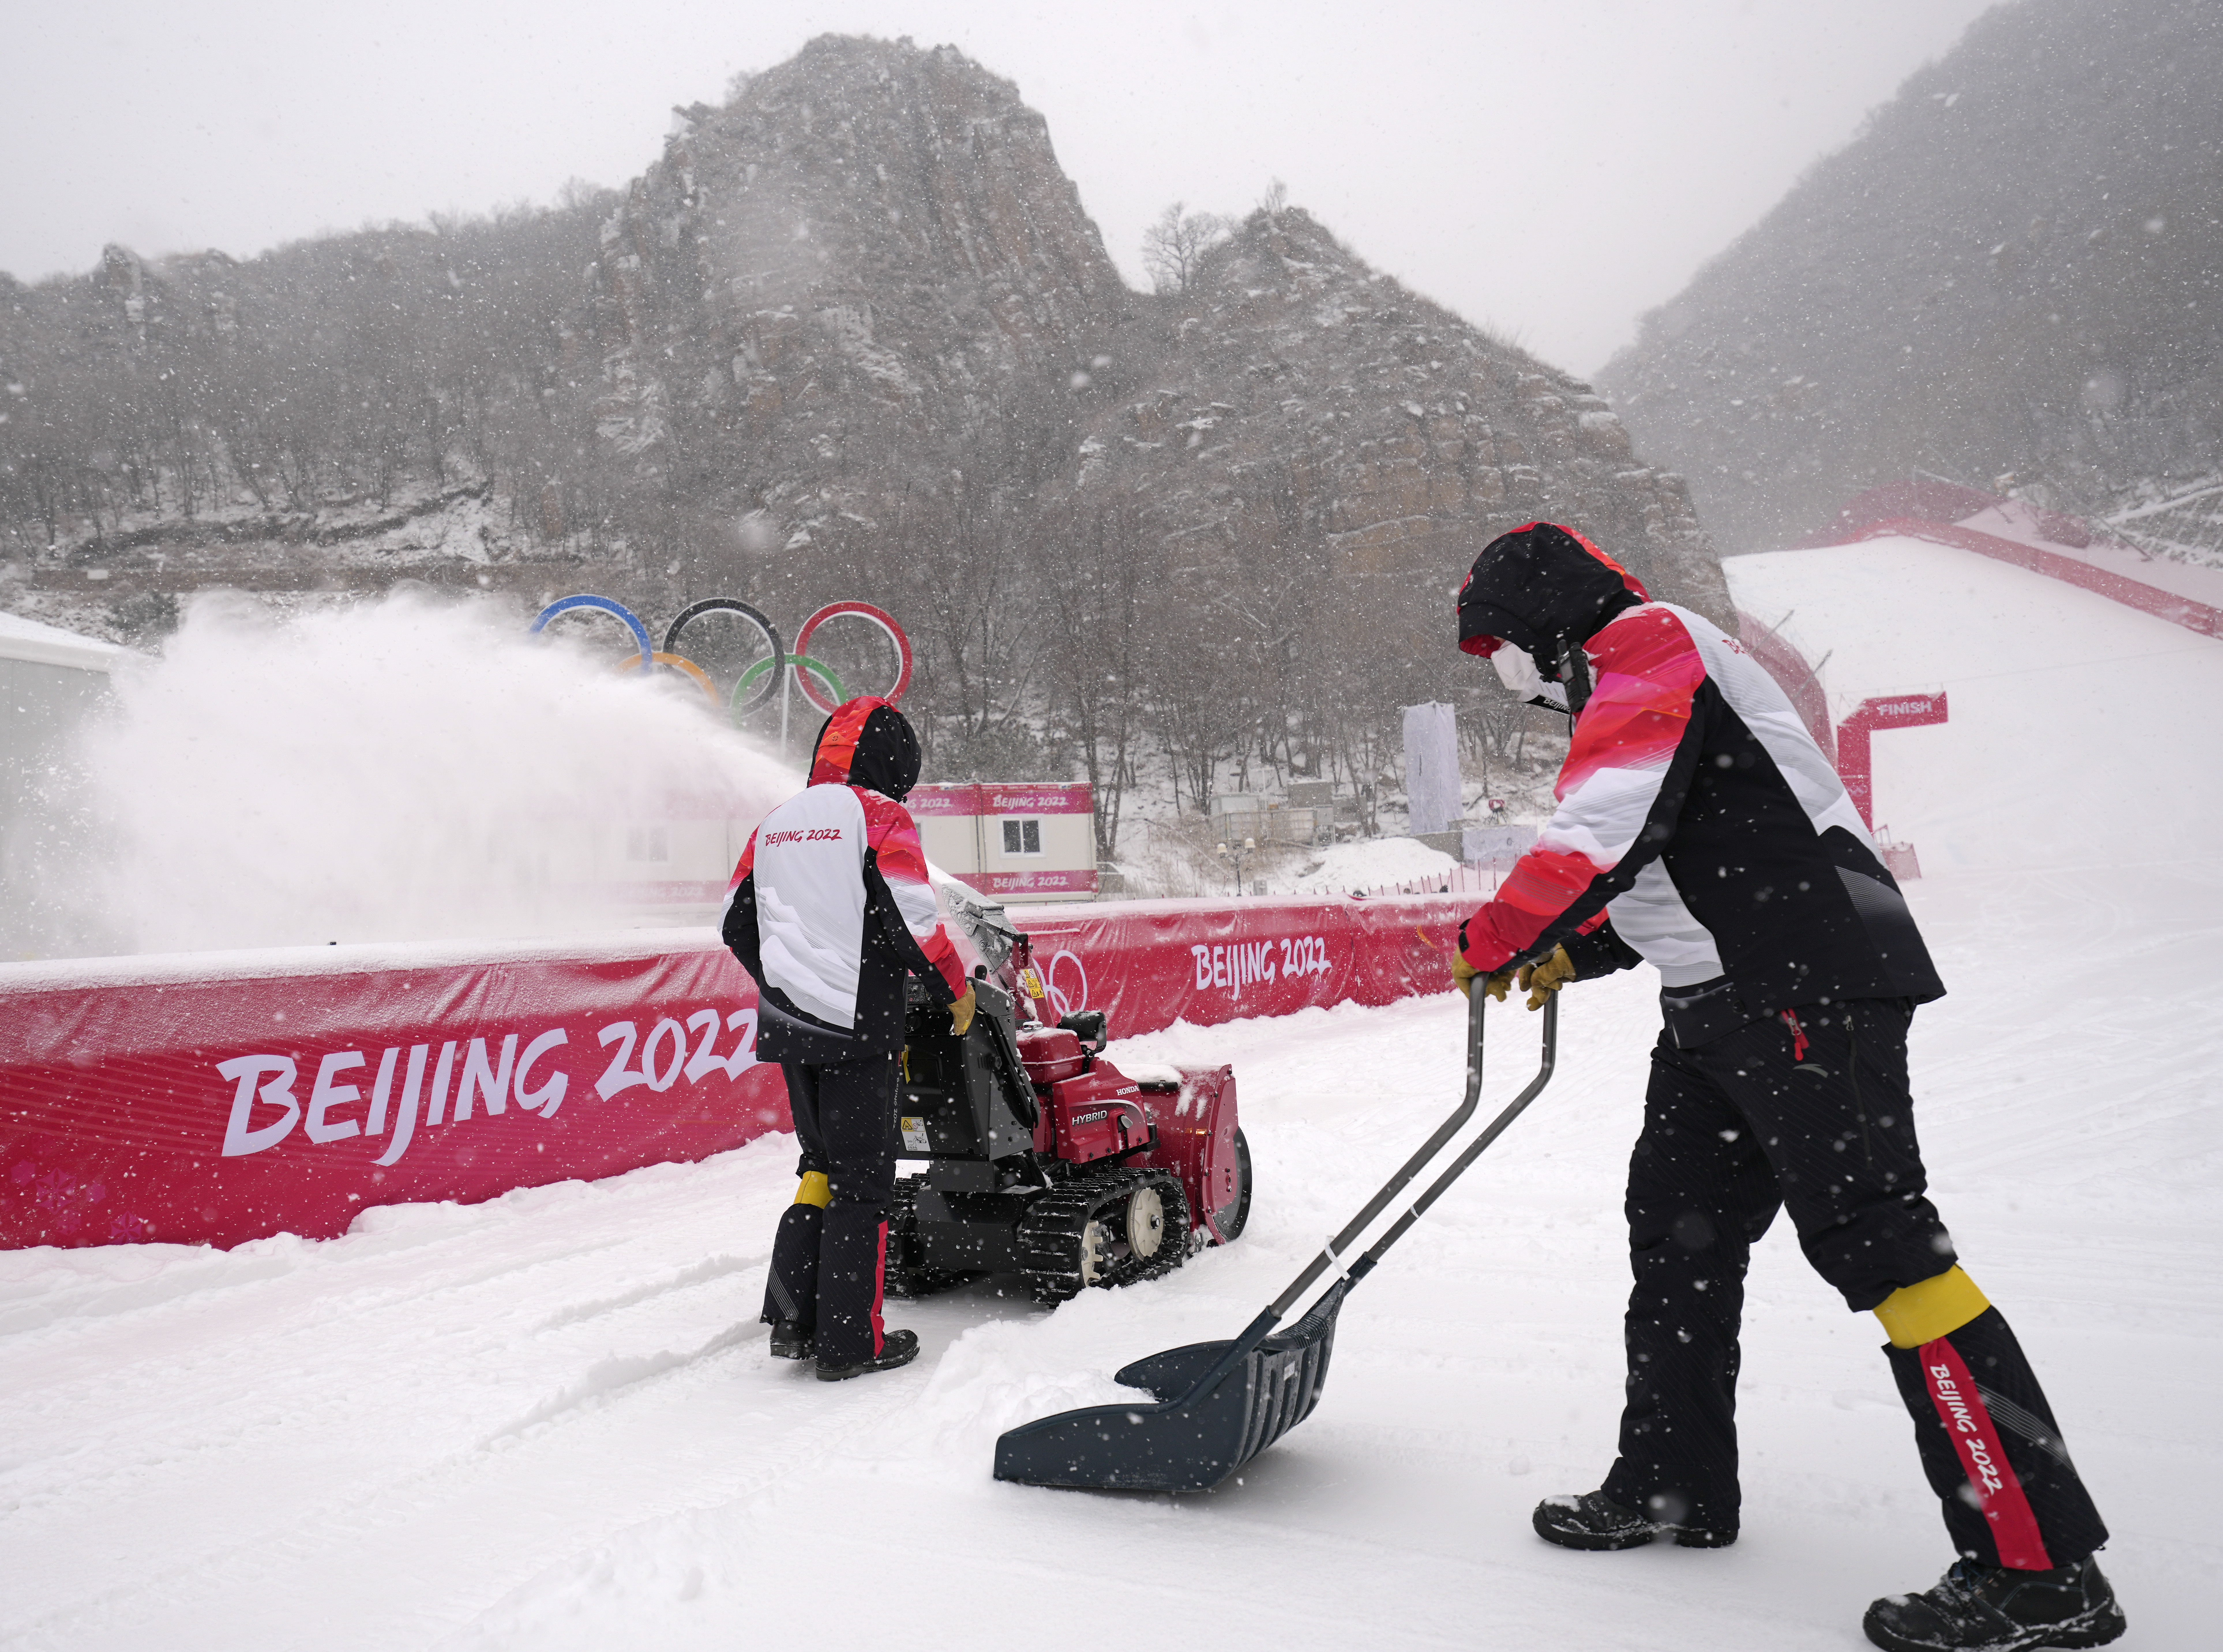 Winter Olympics 2022: Why China is using fake snow at the Games